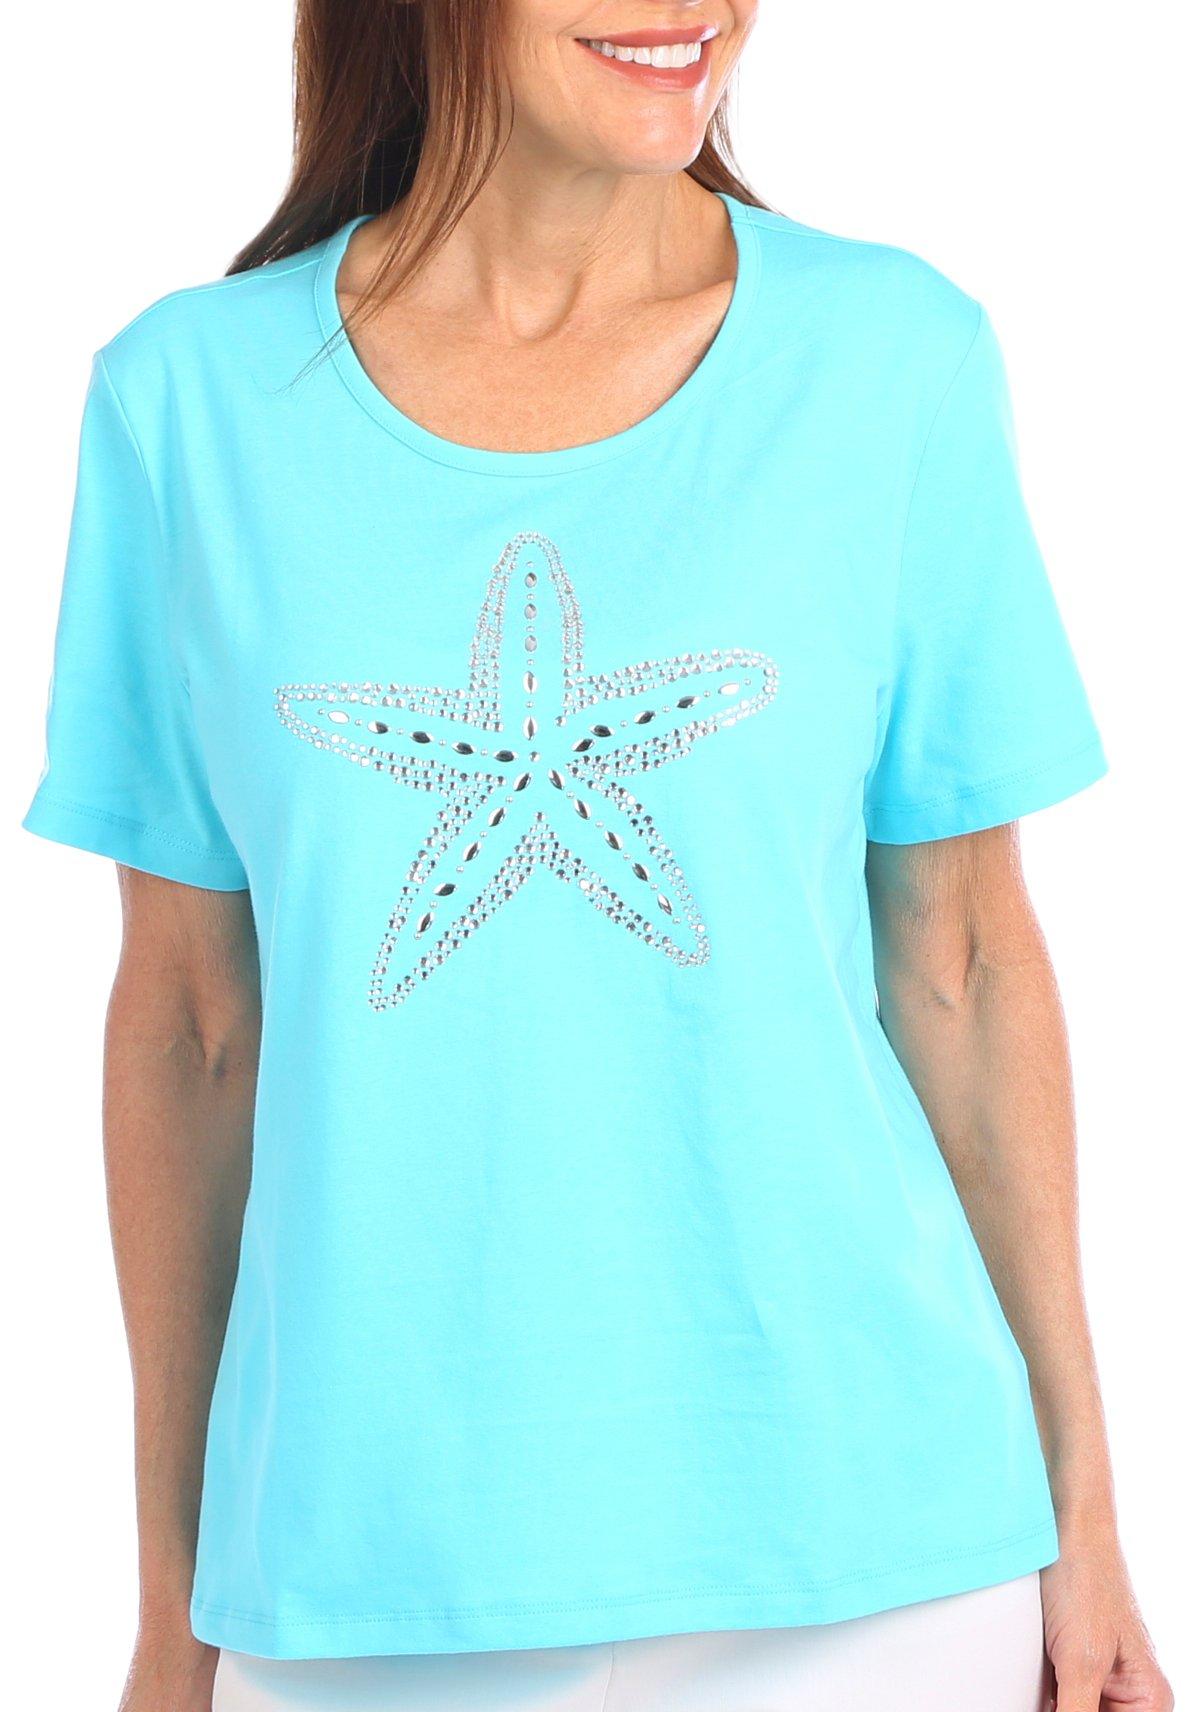 Coral Bay Petite Solid Jeweled Starfish Short Sleeve